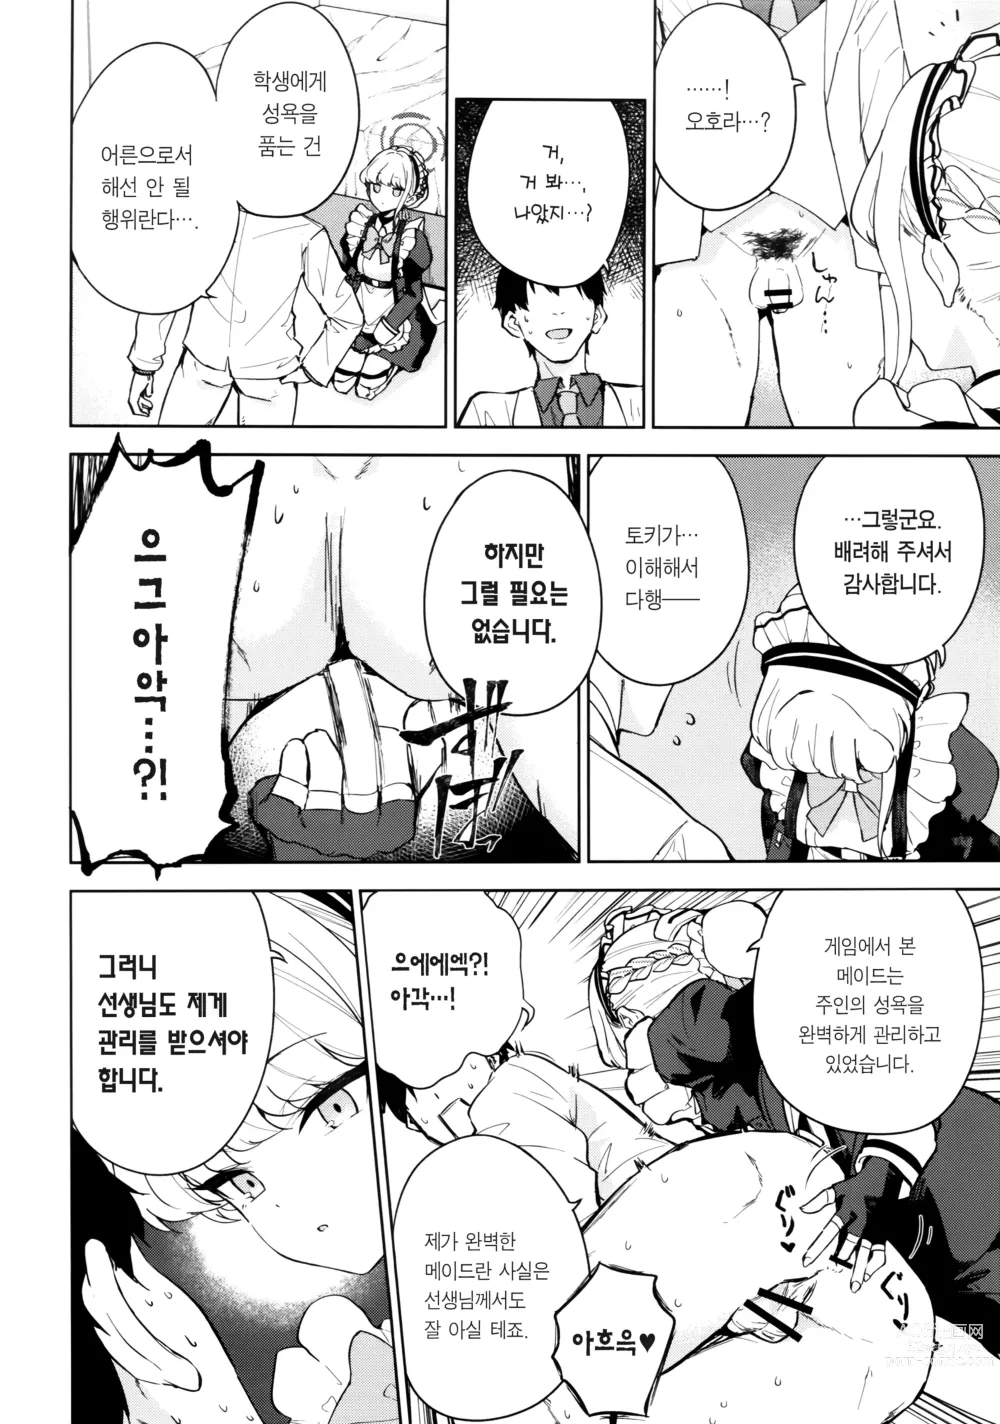 Page 5 of doujinshi Made in Maid